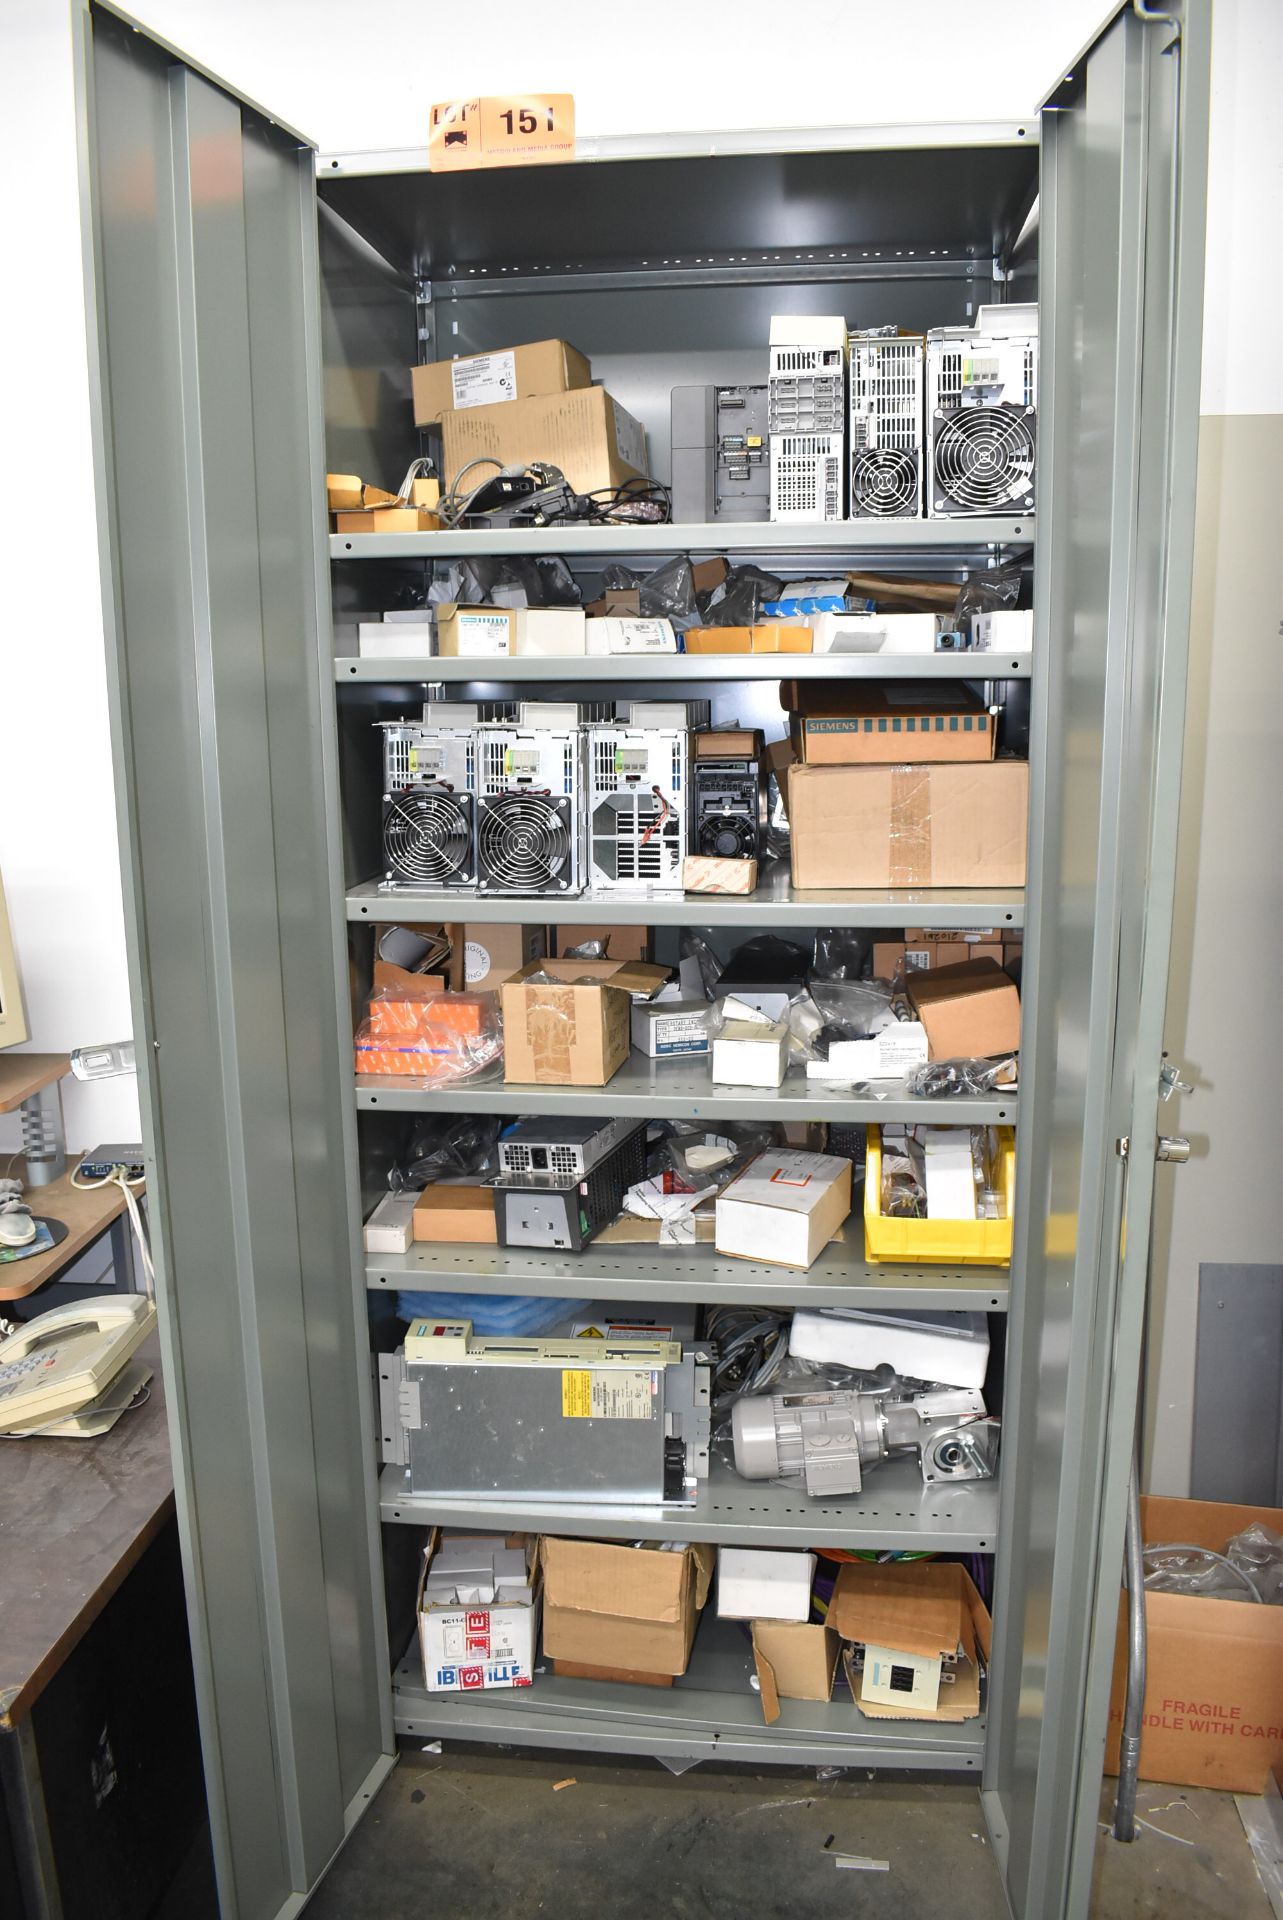 LOT/ HIGHBOY CABINET WITH CONTENTS - INCLUDING SIEMENS COMPONENTS, CONTROL MODULES, ELECTRIC